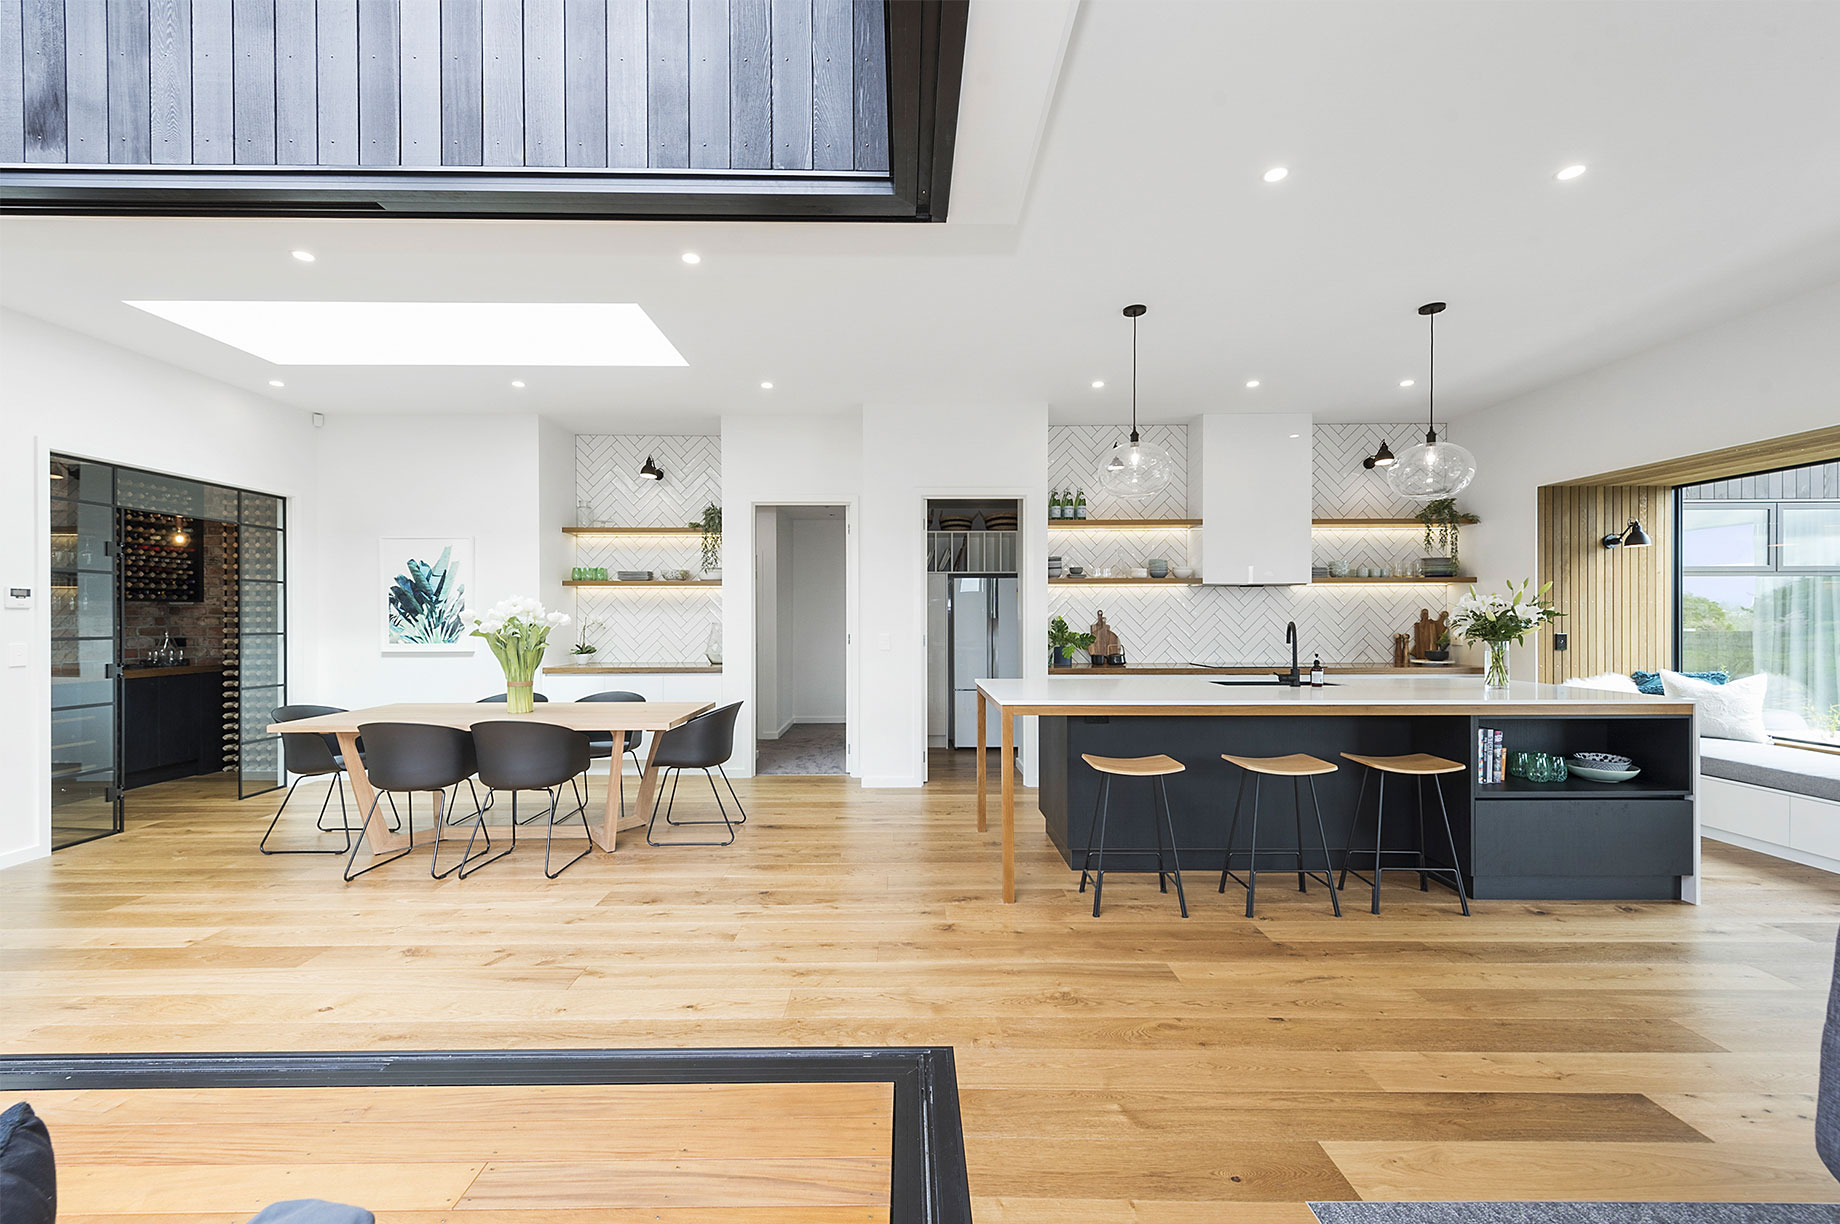 Waikato show home interior with wooden floors